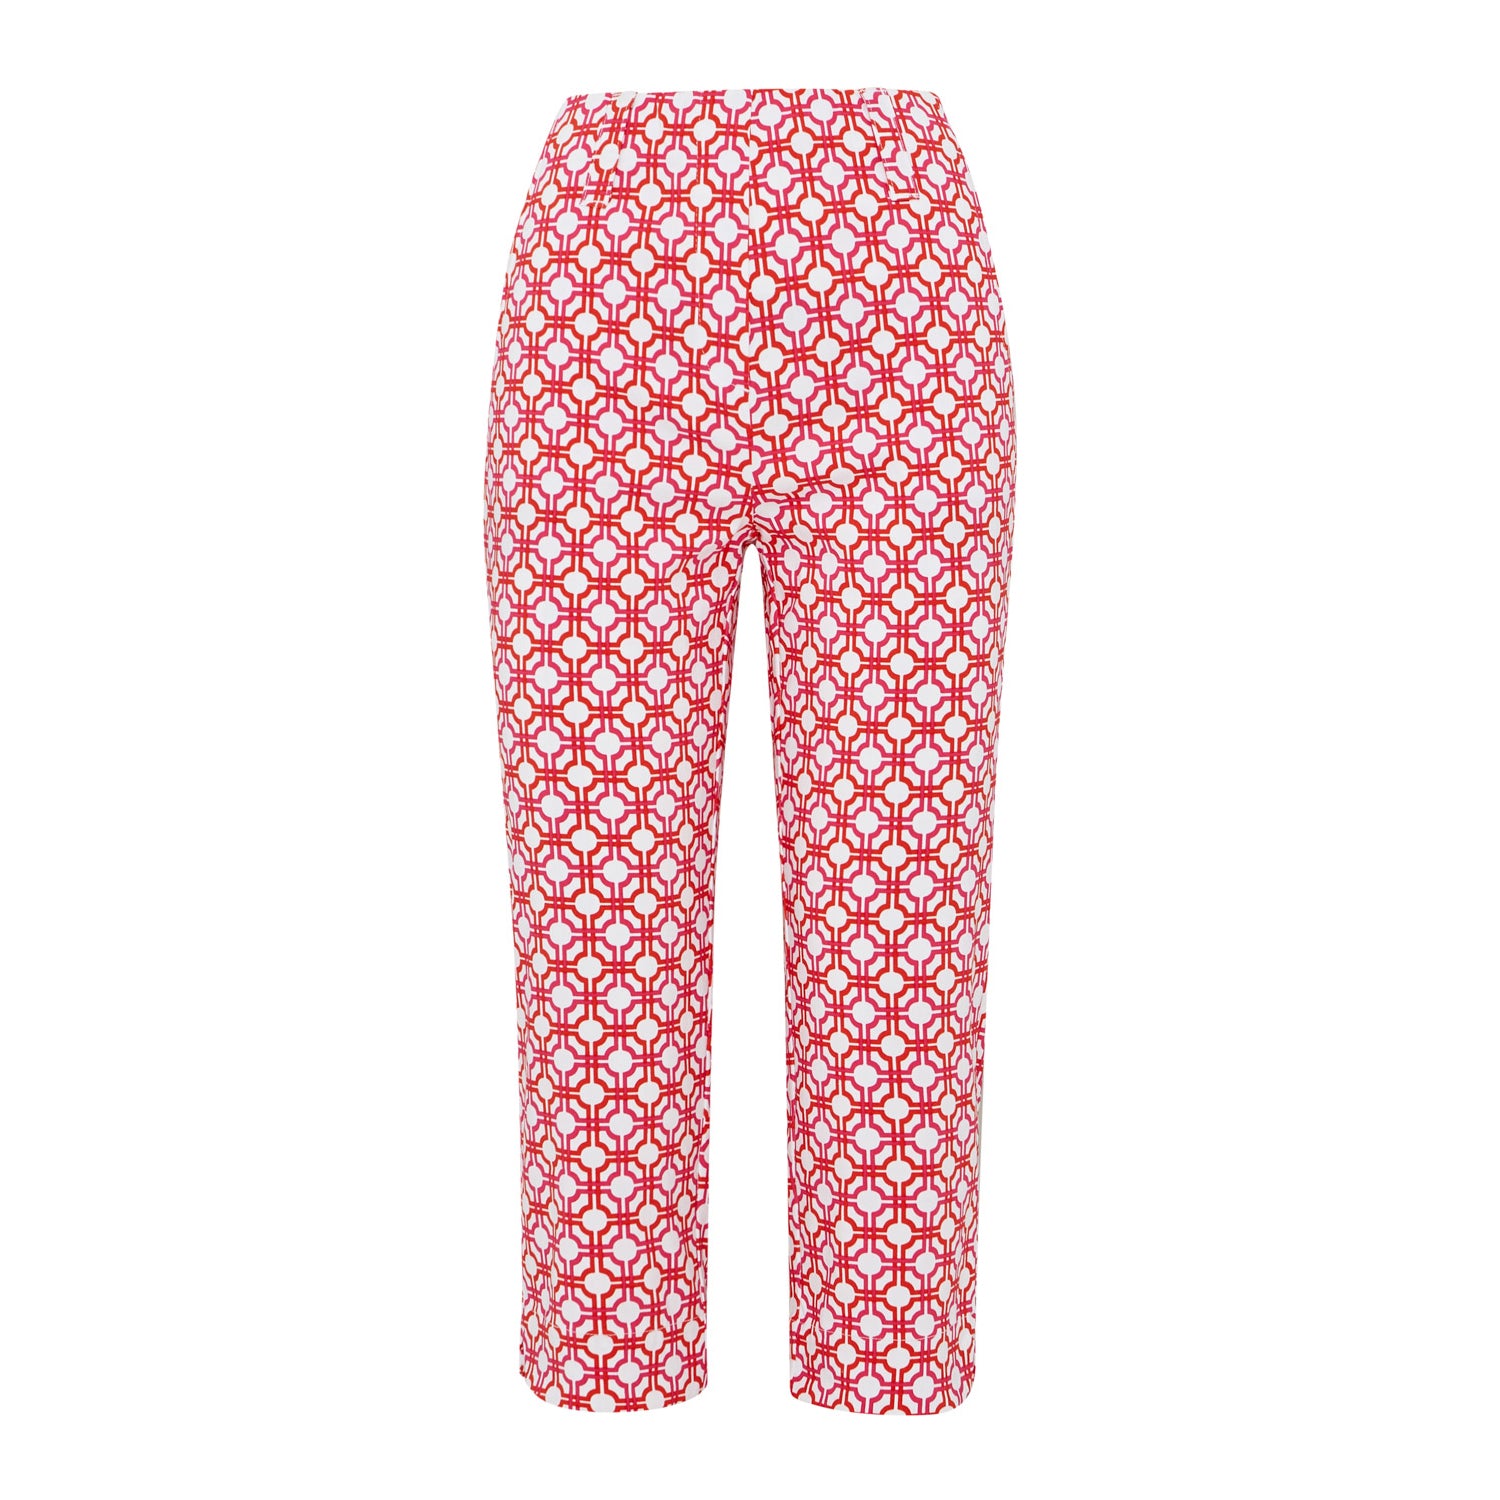 Swing Out Sister Ladies Pull-On Capris in Lush Pink and Mandarin with Mosaic Pattern